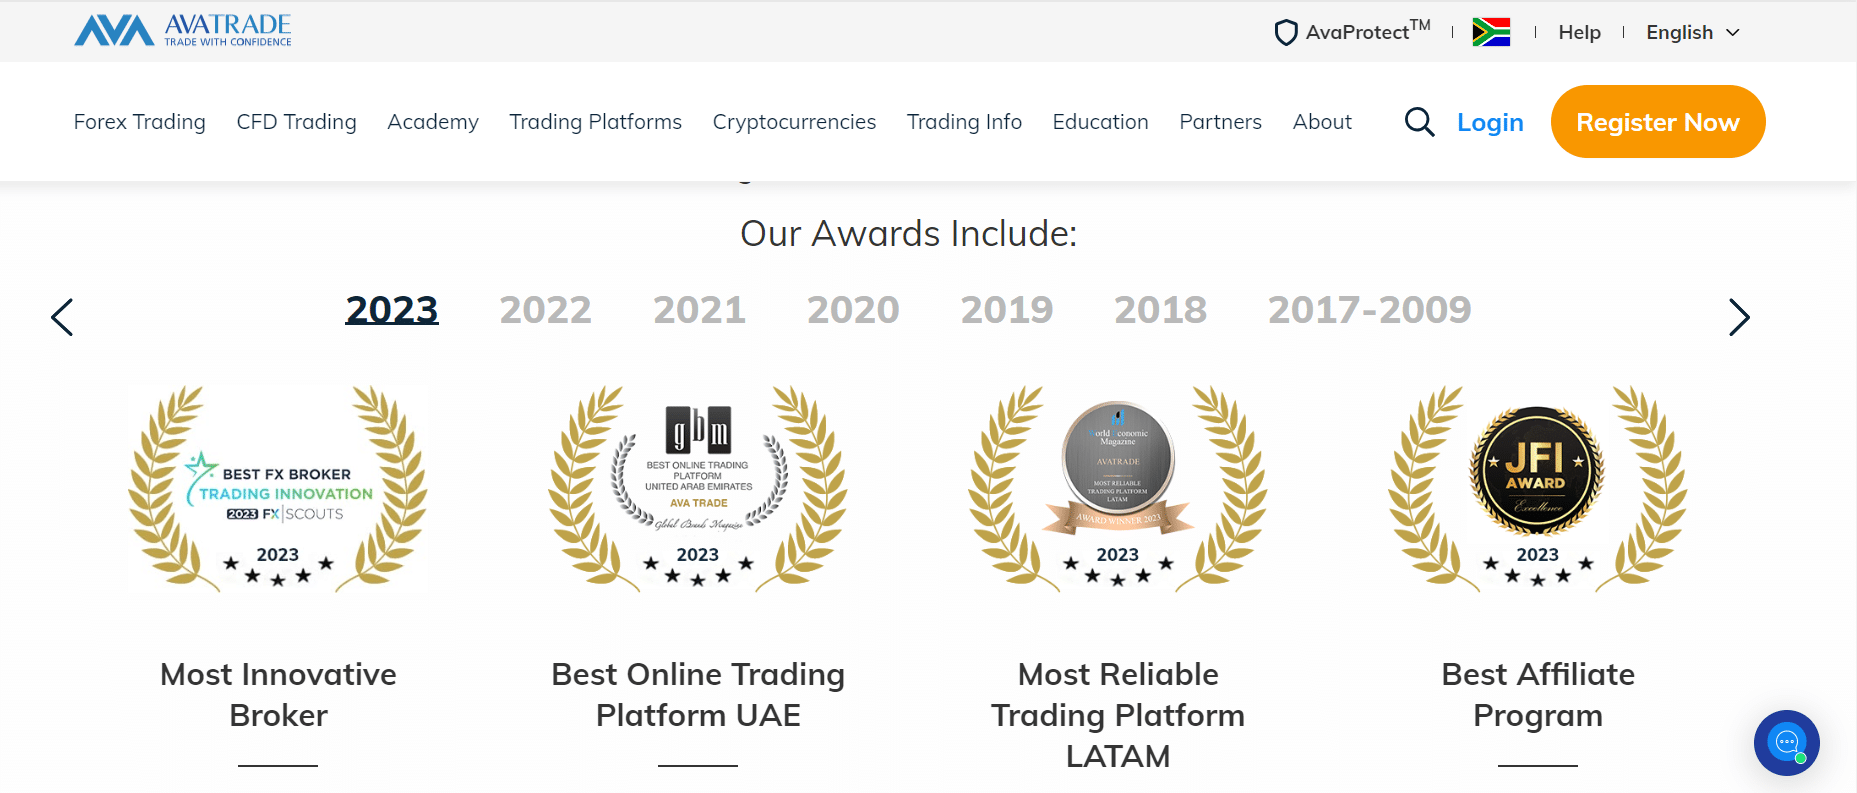 AvaTrade Awards and Recognition